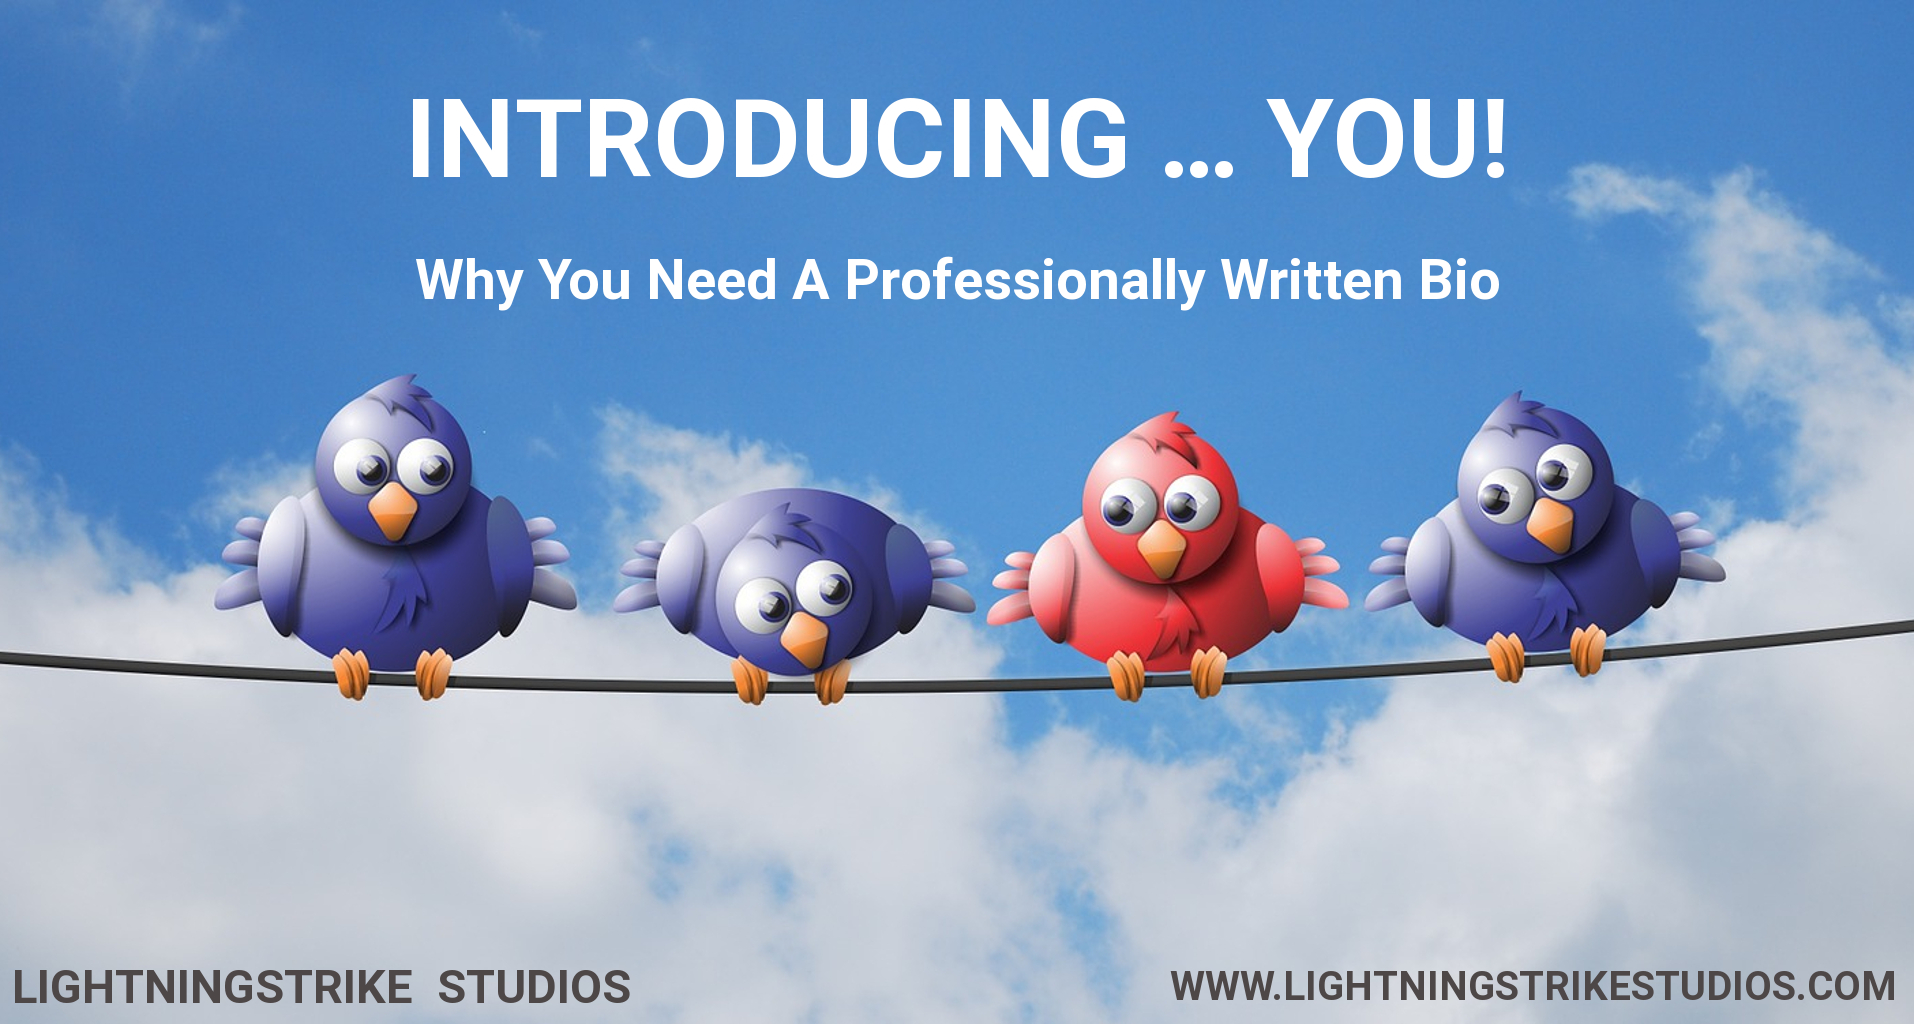 Introducing ... You! - Why You Need A Professionally Written Bio